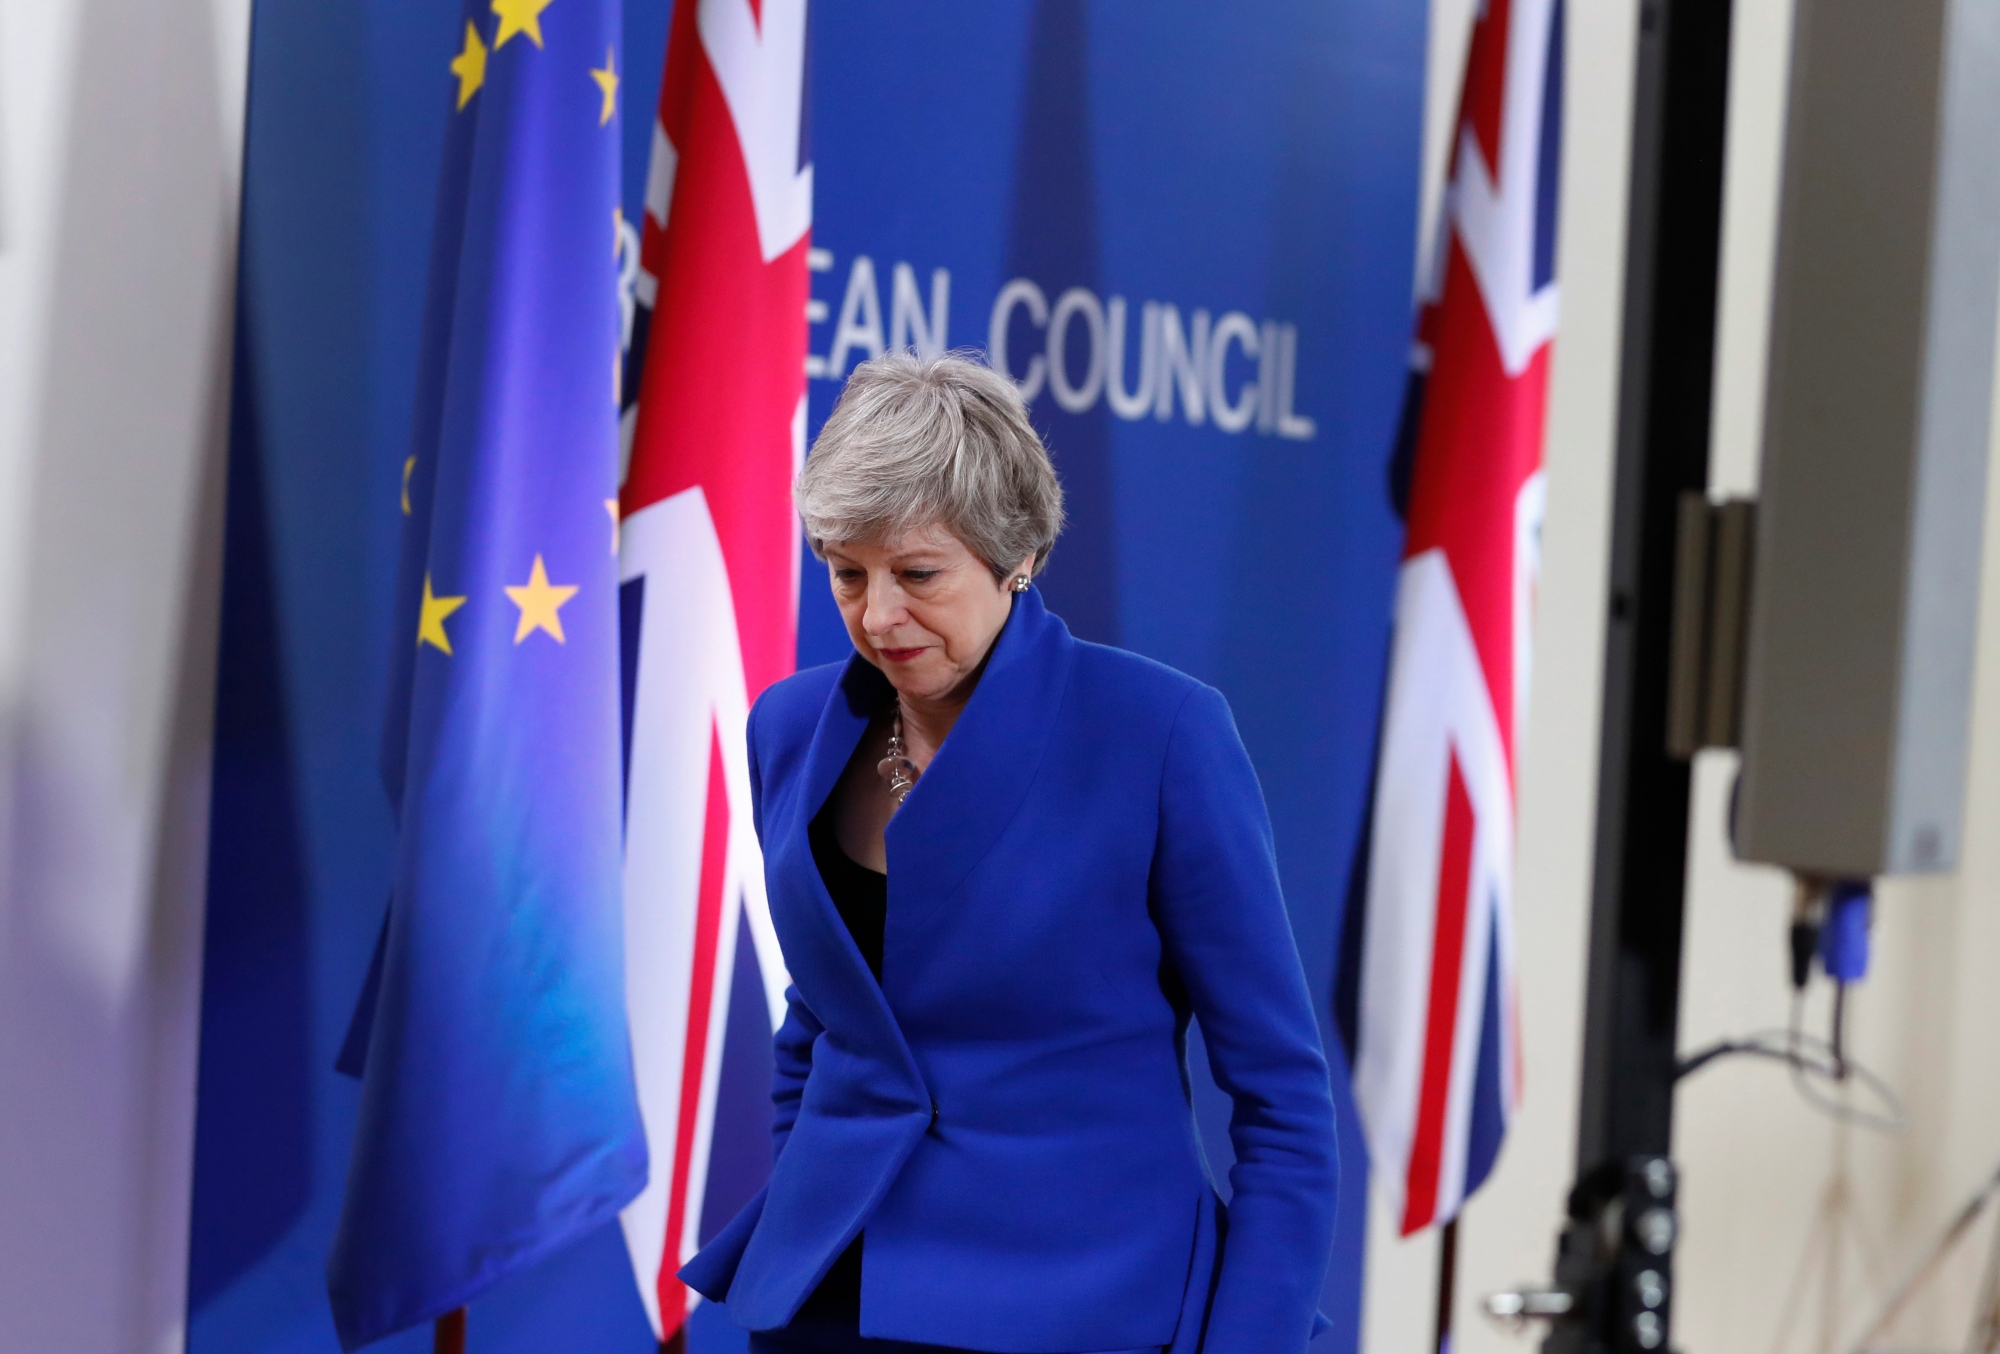 British Prime Minister Theresa May leaves the podium after addressing a media conference at the conclusion of an EU summit in Brussels, Thursday, April 11, 2019. European Union leaders on Thursday offered Britain an extension to Brexit that would allow the country to delay its EU departure date until Oct. 31. (AP Photo/Alastair Grant) Belgium EU Brexit